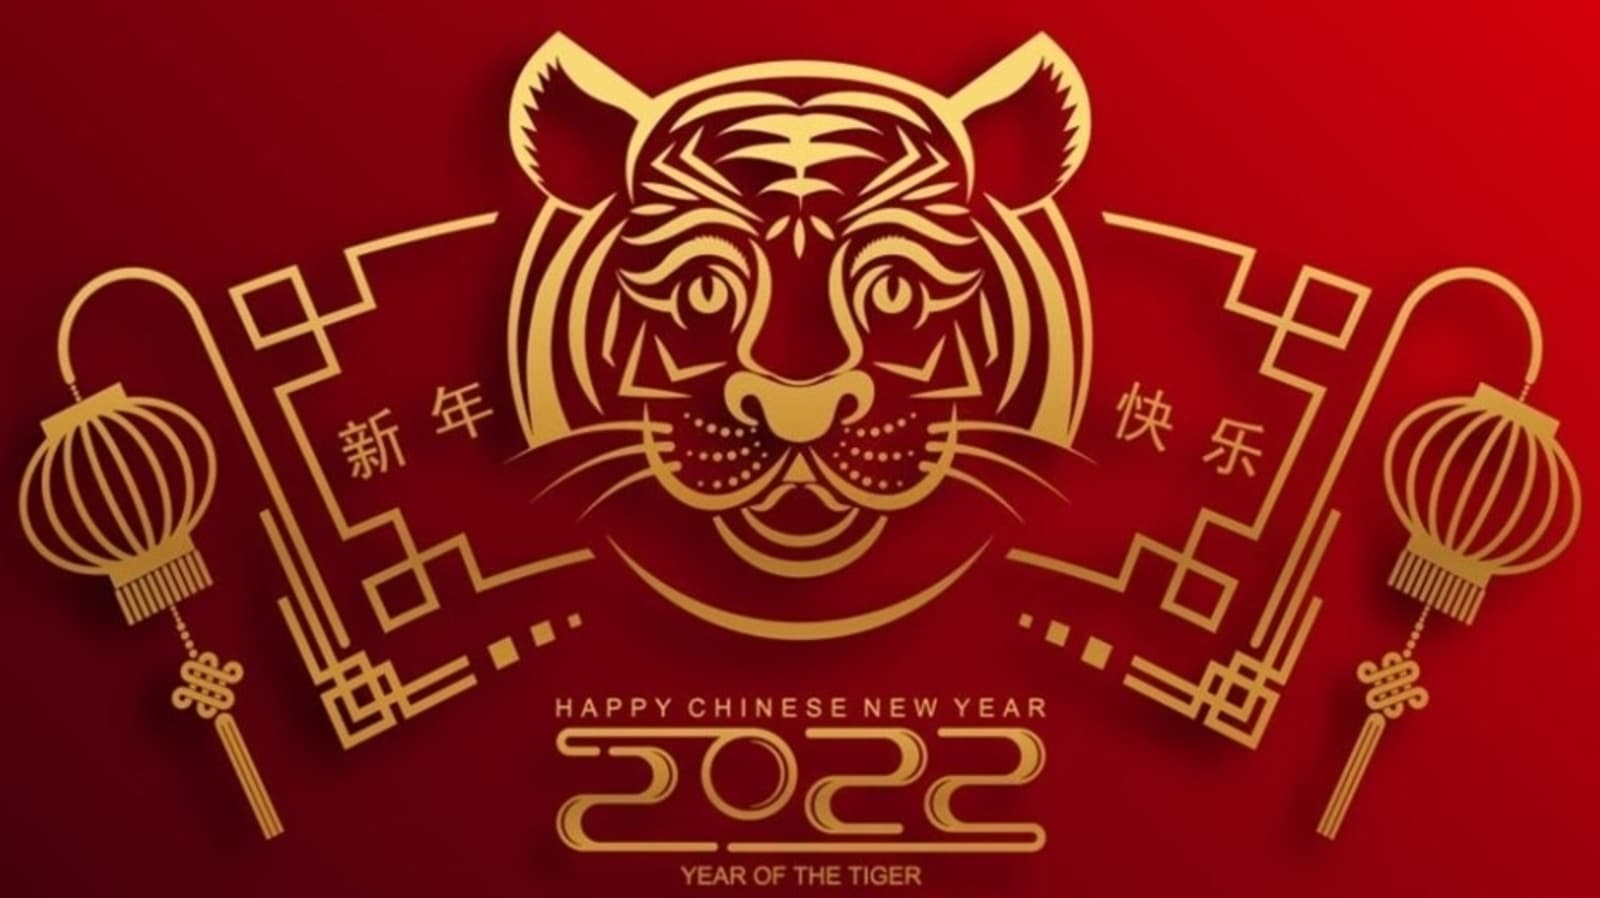 12 Lunar New Year Outfits to Celebrate the Year of the Tiger